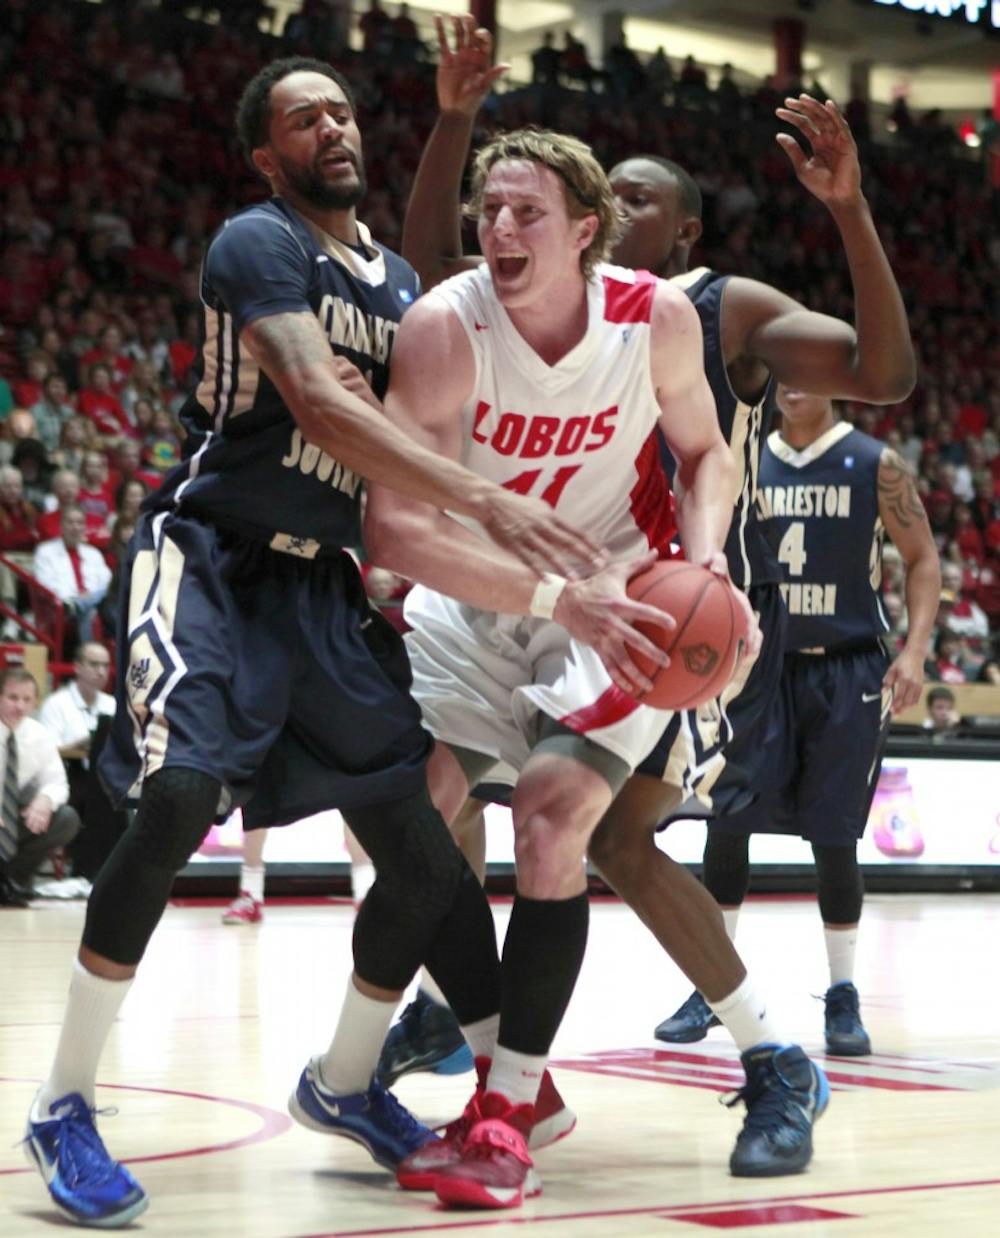 UNM forward Cameron Bairstow tries for two and is fouled down by Charleston's Will Saunders #1 and Alhaji Fullah #35 Sunday night at the Pit. UNM won the game against Charleston 109-93.